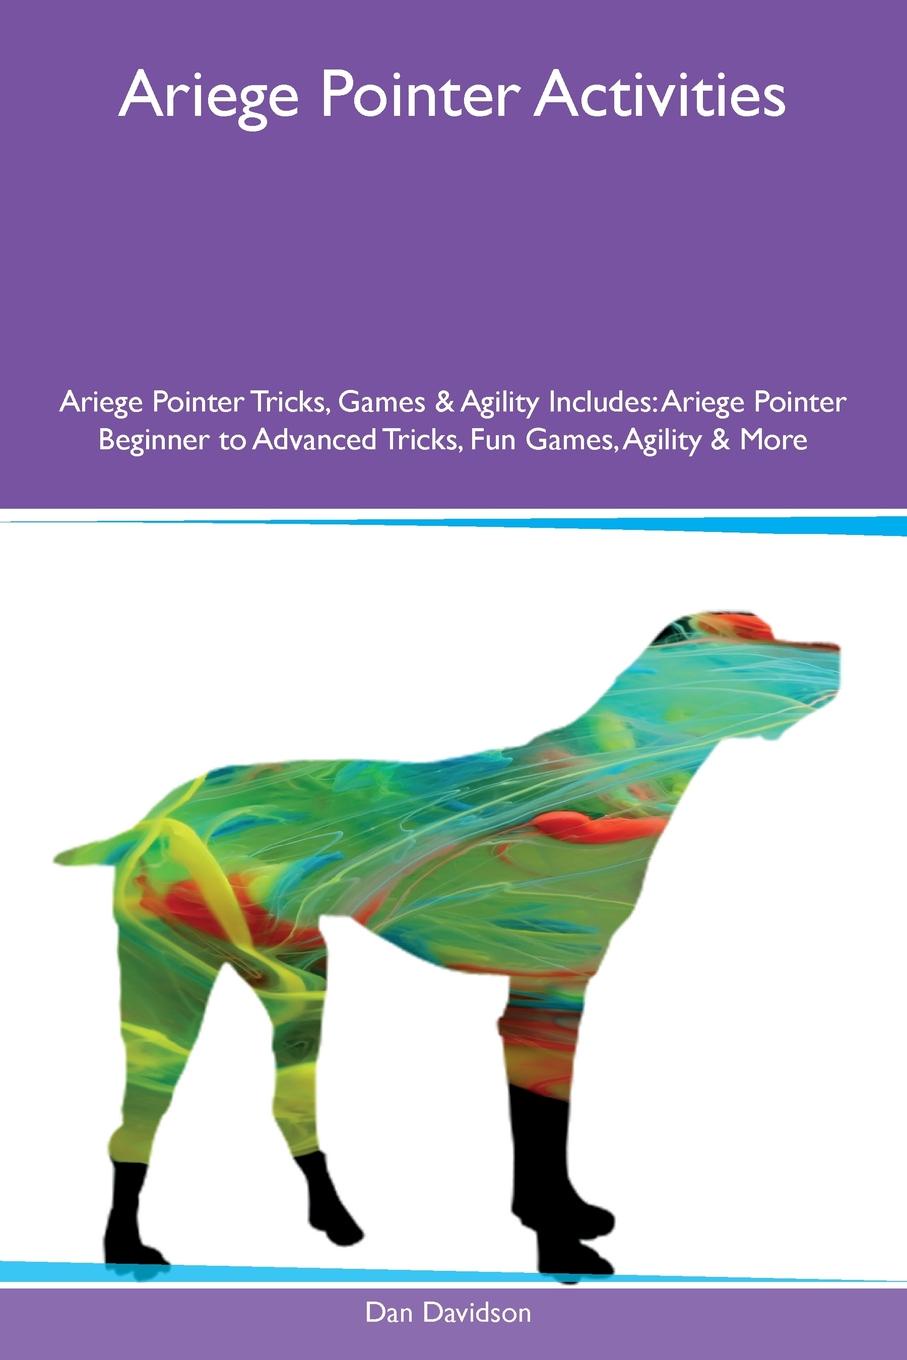 Ariege Pointer Activities Ariege Pointer Tricks, Games & Agility Includes. Ariege Pointer Beginner to Advanced Tricks, Fun Games, Agility & More